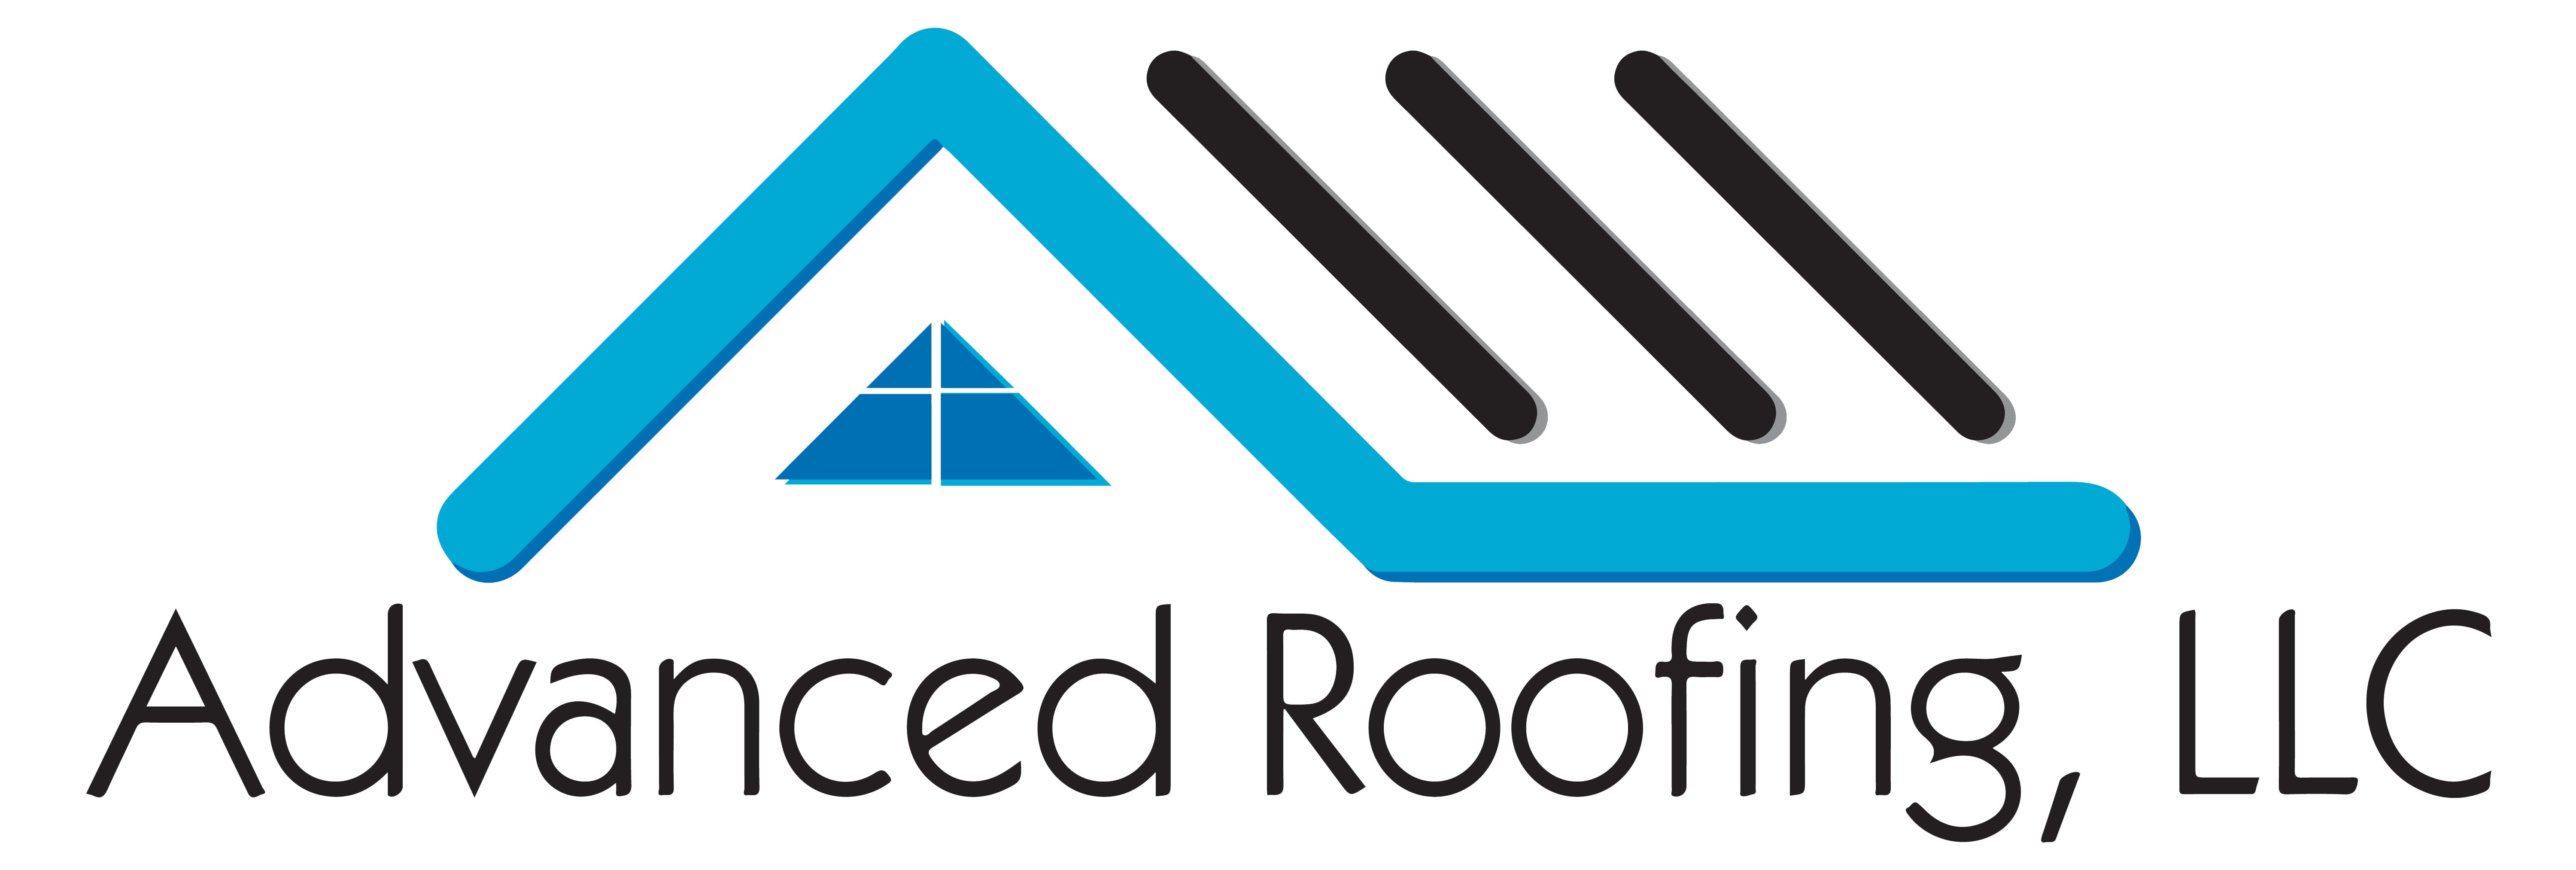 Advanced Roofing Logo